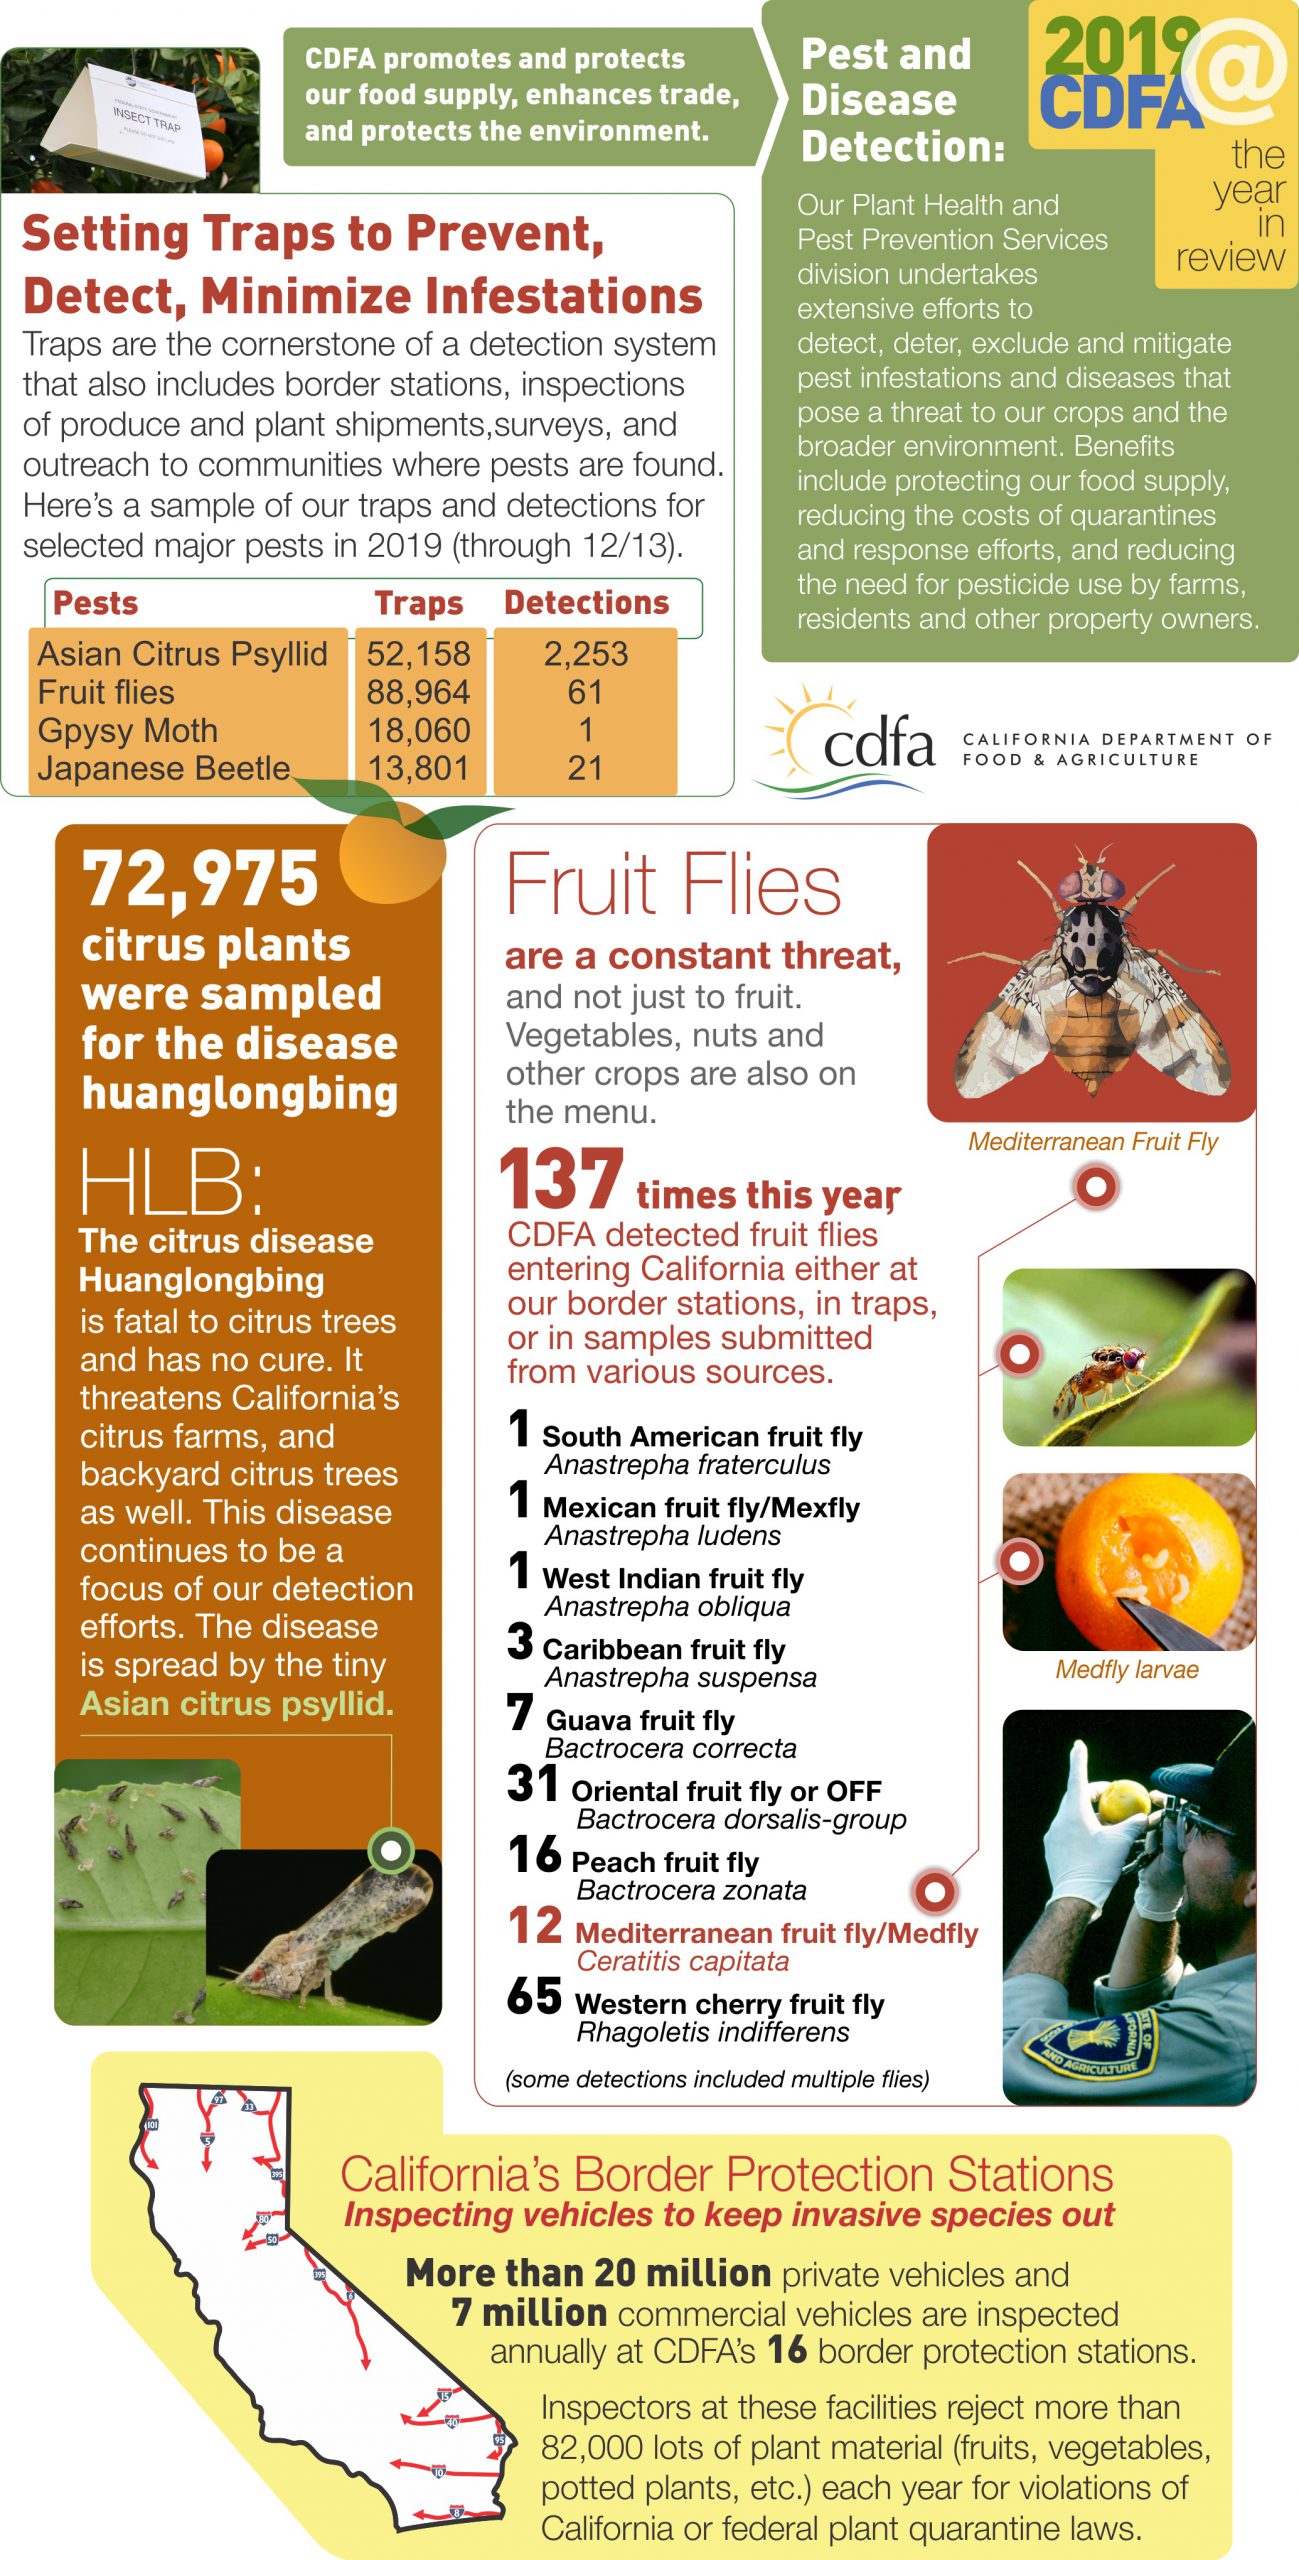 2019 in Review: Protecting Crops, Animals and More from Pests and Diseases  – CDFA's Planting Seeds BlogCDFA's Planting Seeds Blog